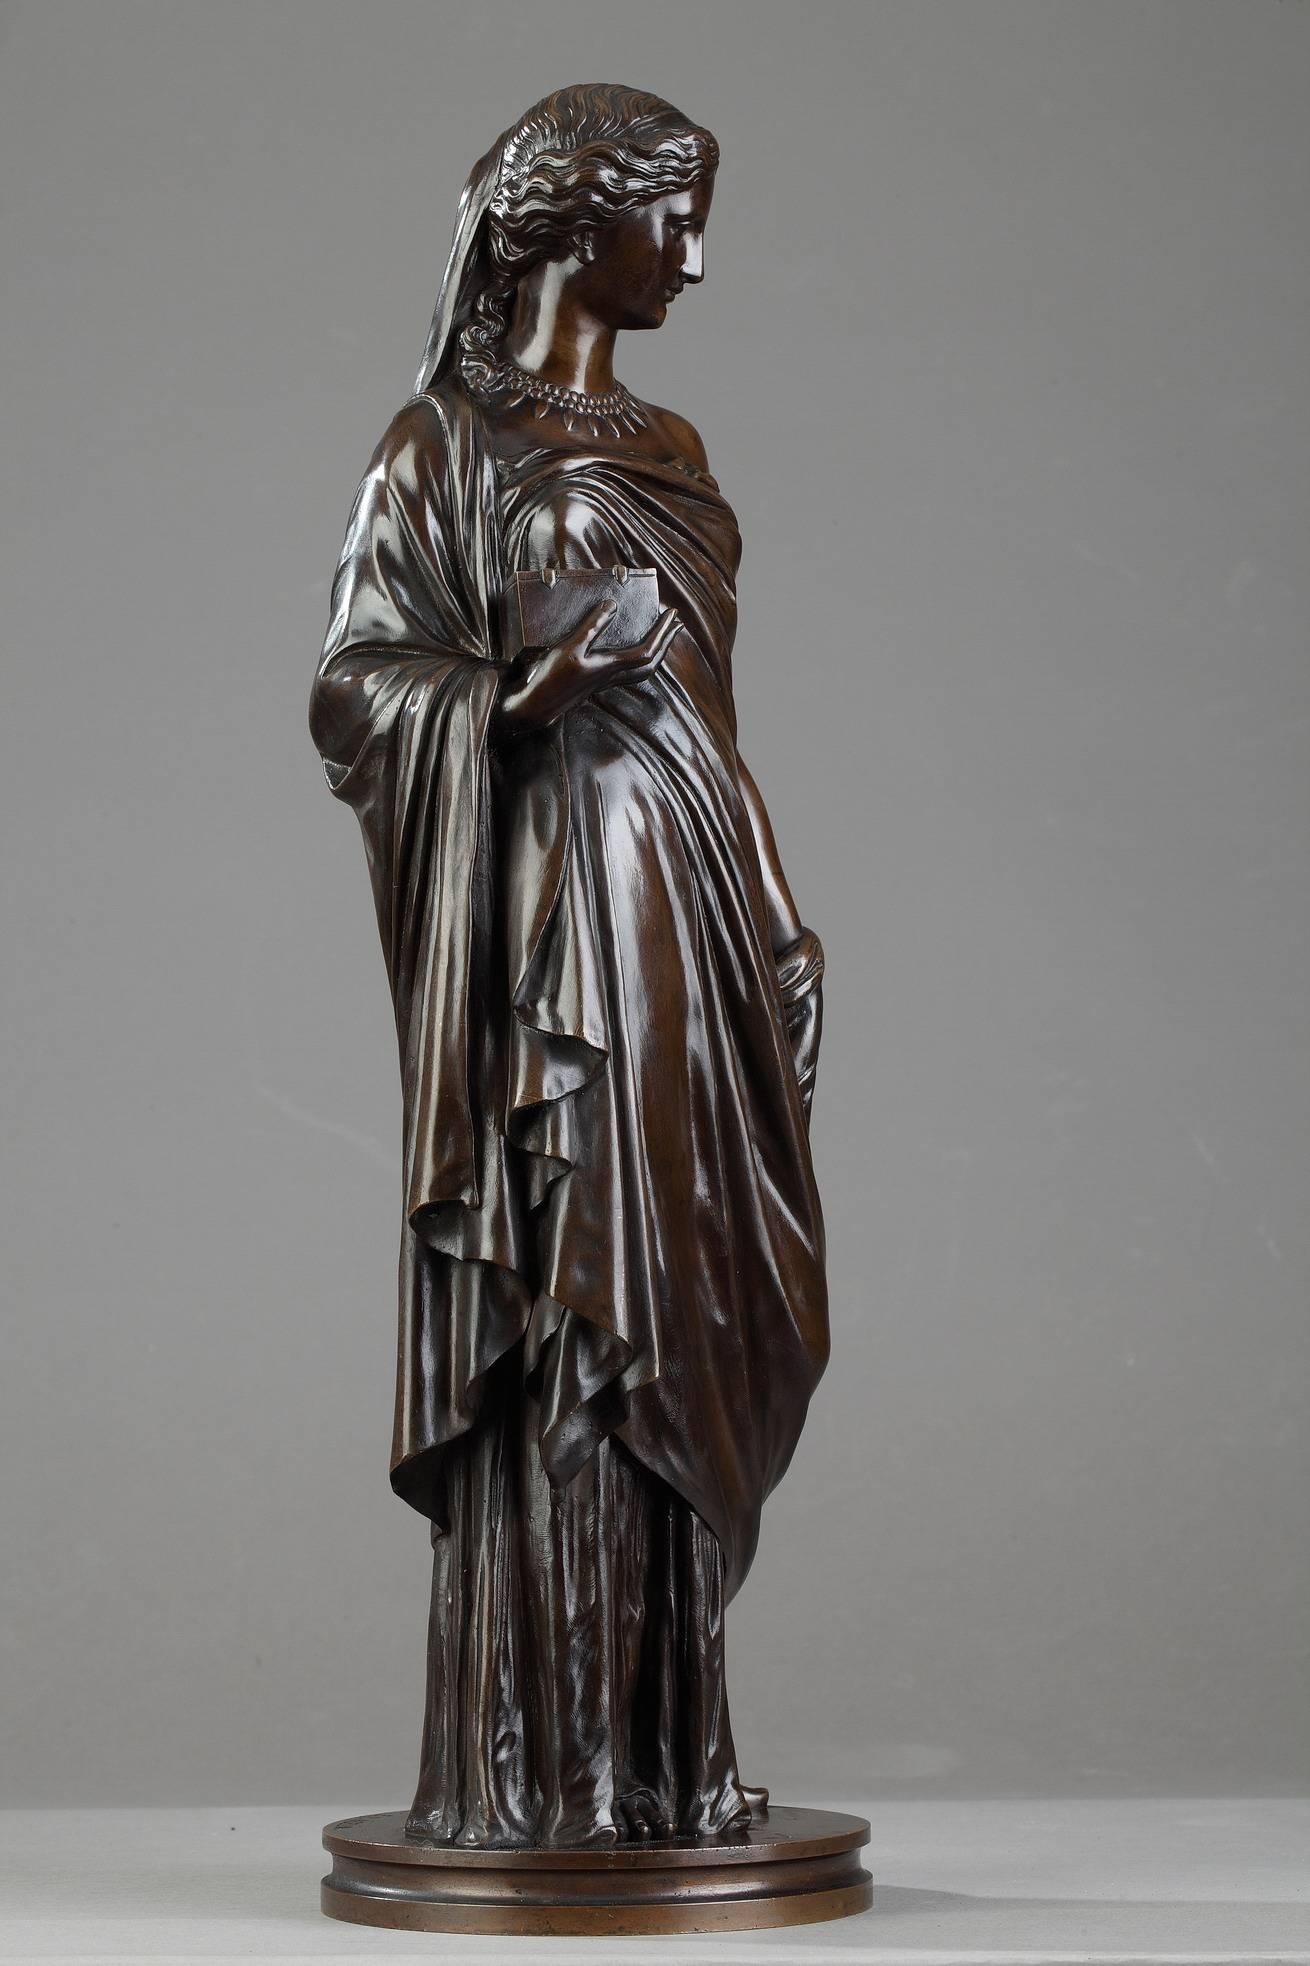 Late 19th century patinated bronze statue by Eugène Antoine Aizelin (1821-1902). It features Pandora in a standing pose wearing a flowing robe, holding a box close to her chest. Signed on the base: 